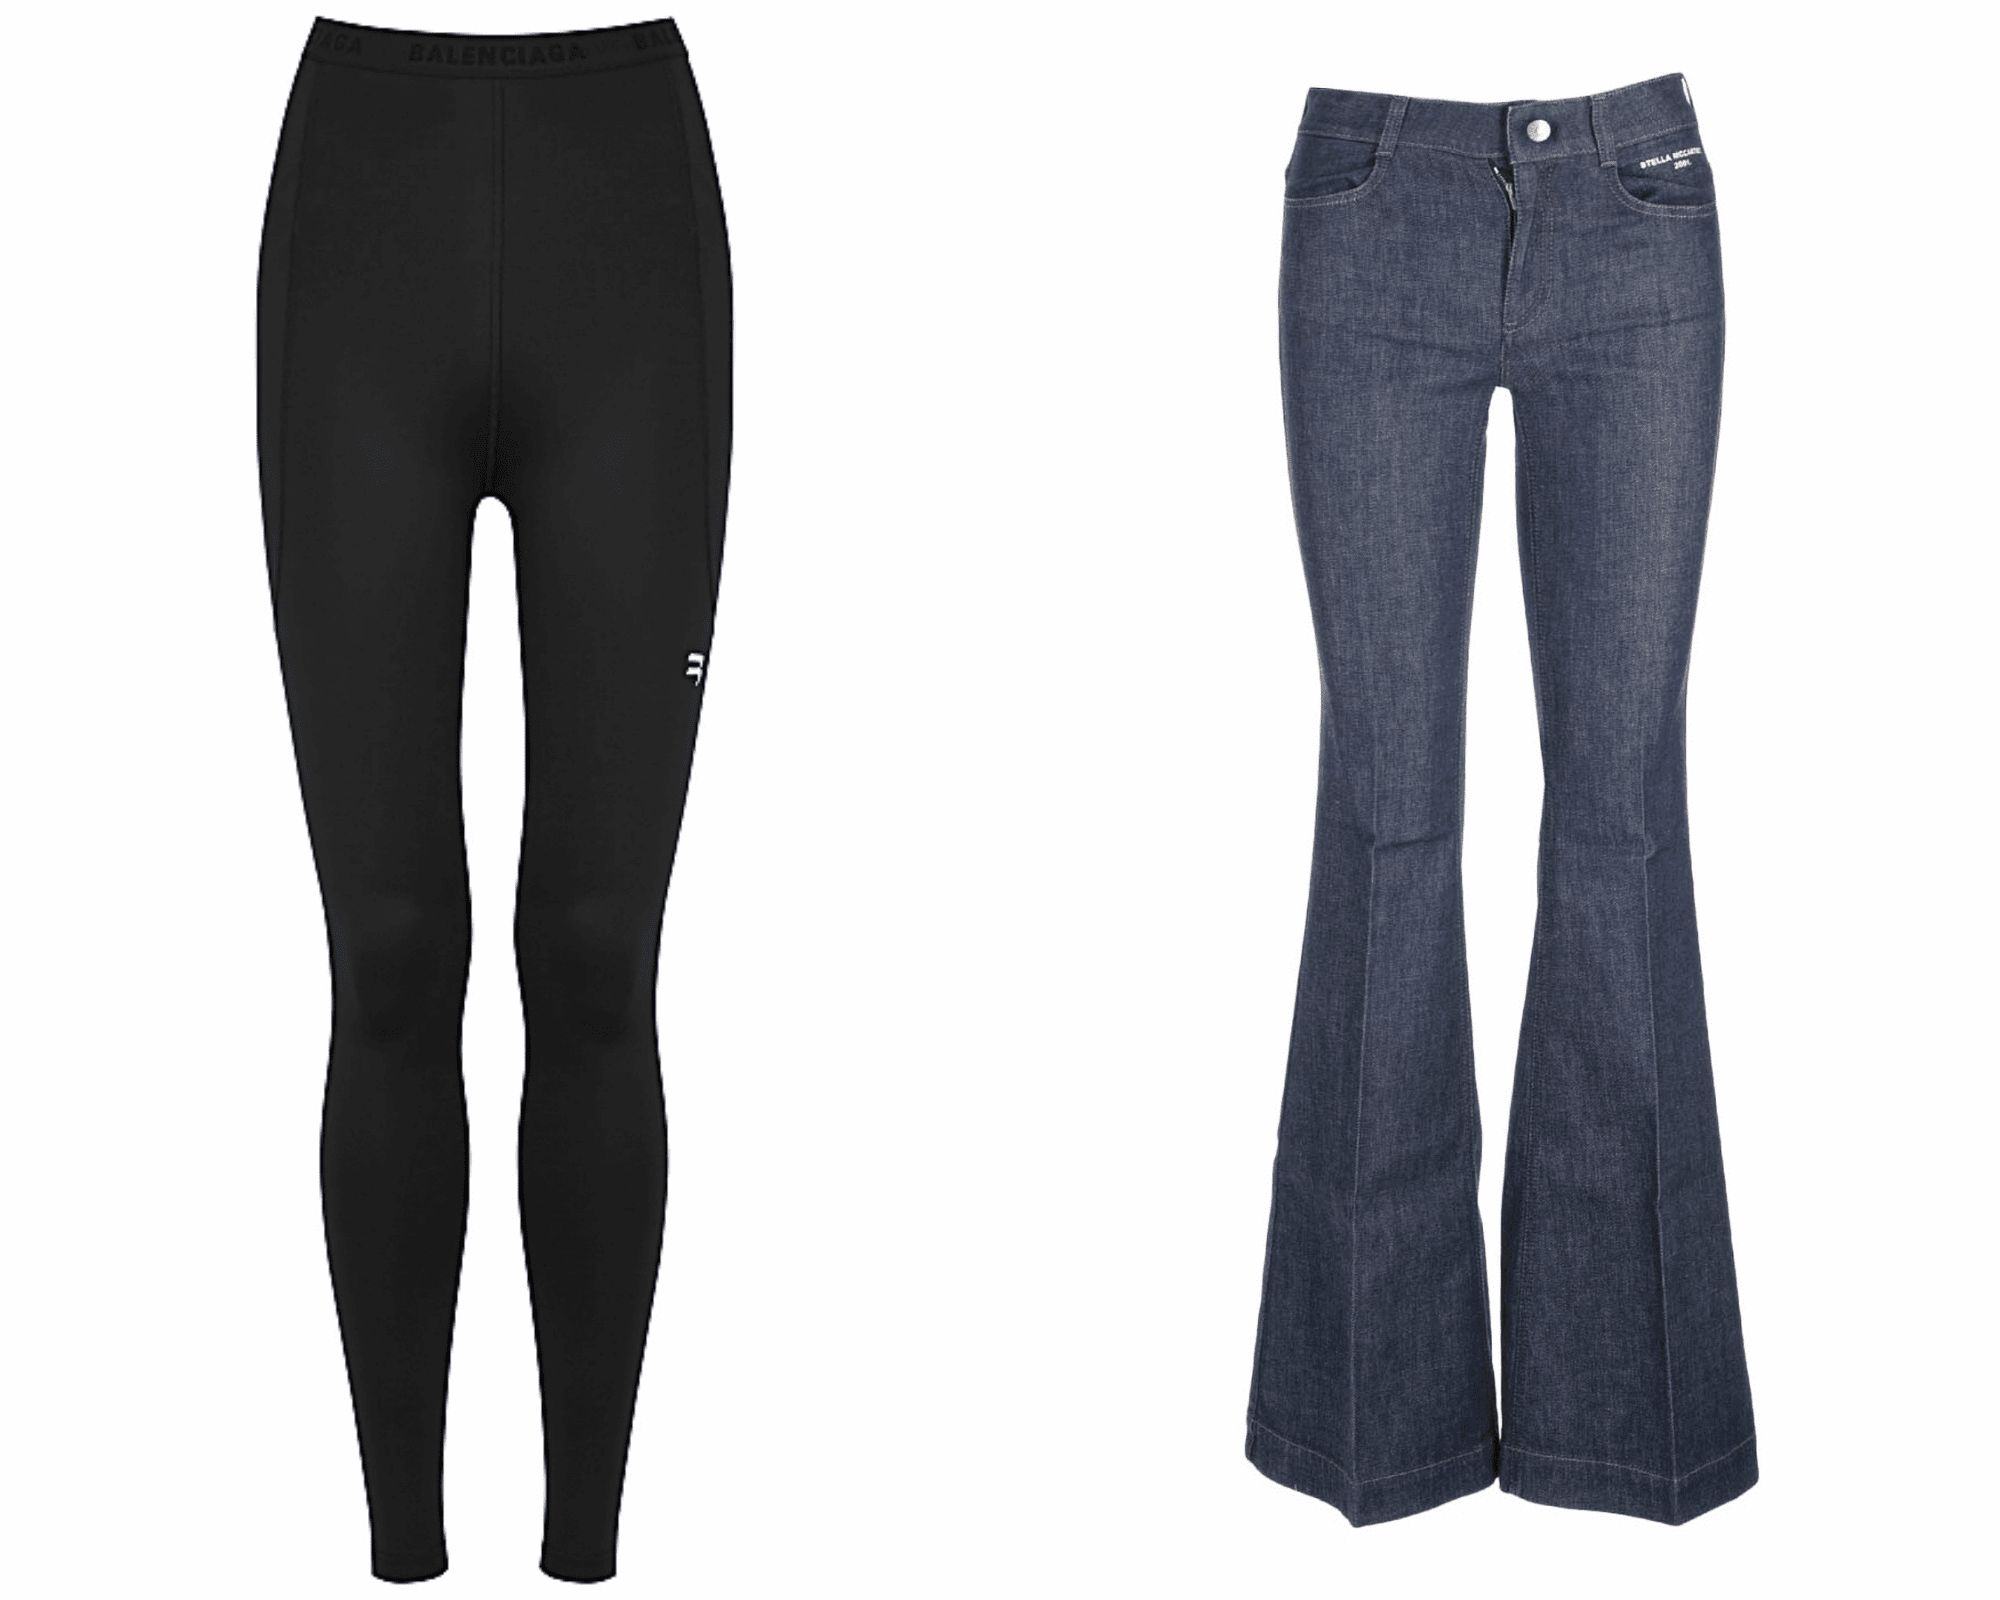 Two trousers, the first one is a Balenciaga pair of leggings, black and simple. The second one is a pair of flared blue jeans by Stella McCartney